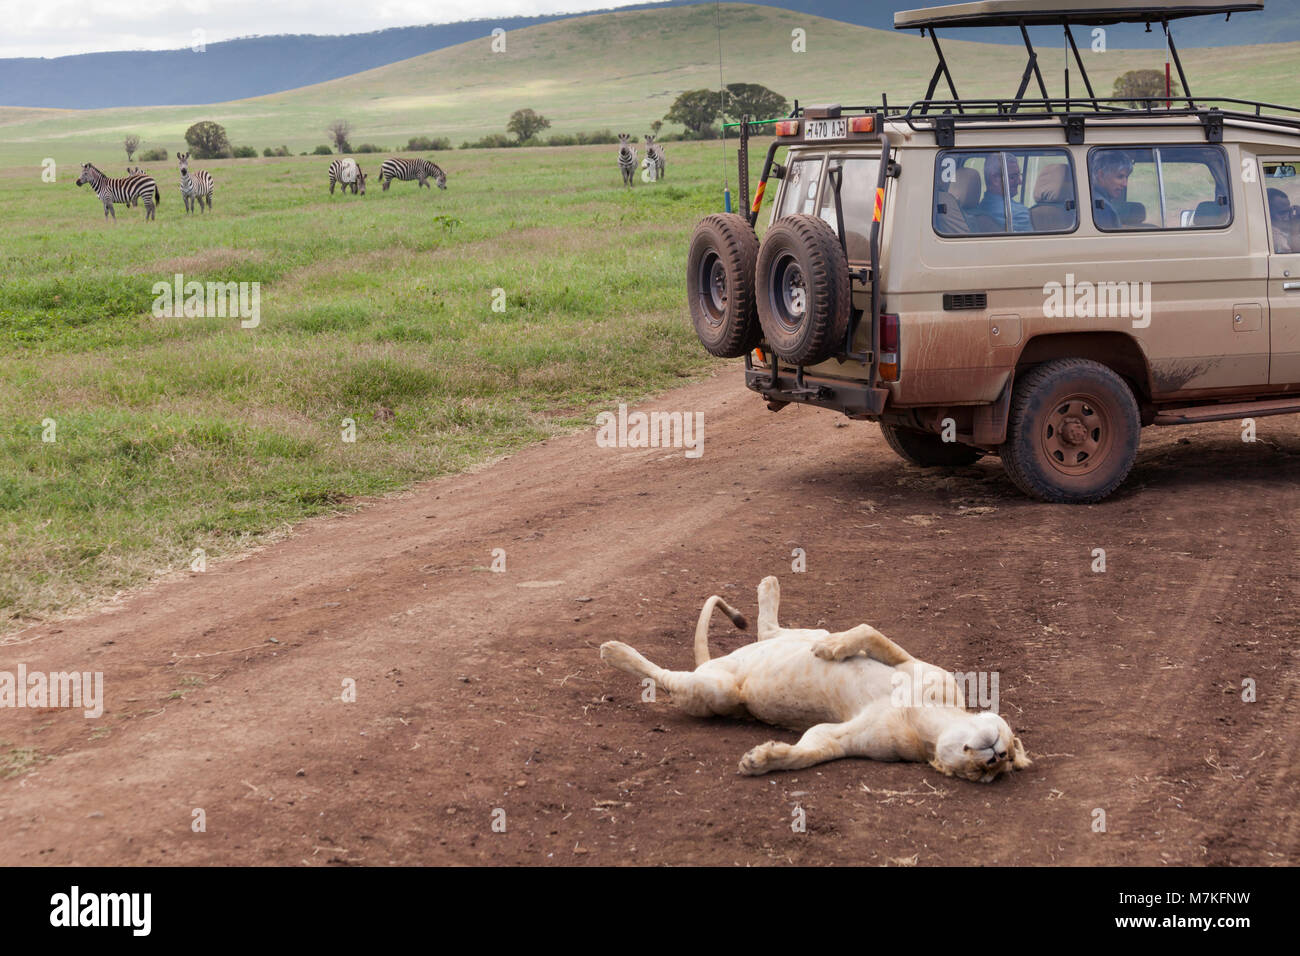 A lion sleeps on the road in the Ngoronogoro Crater National Park, Tanzania while the zebras look on. Stock Photo